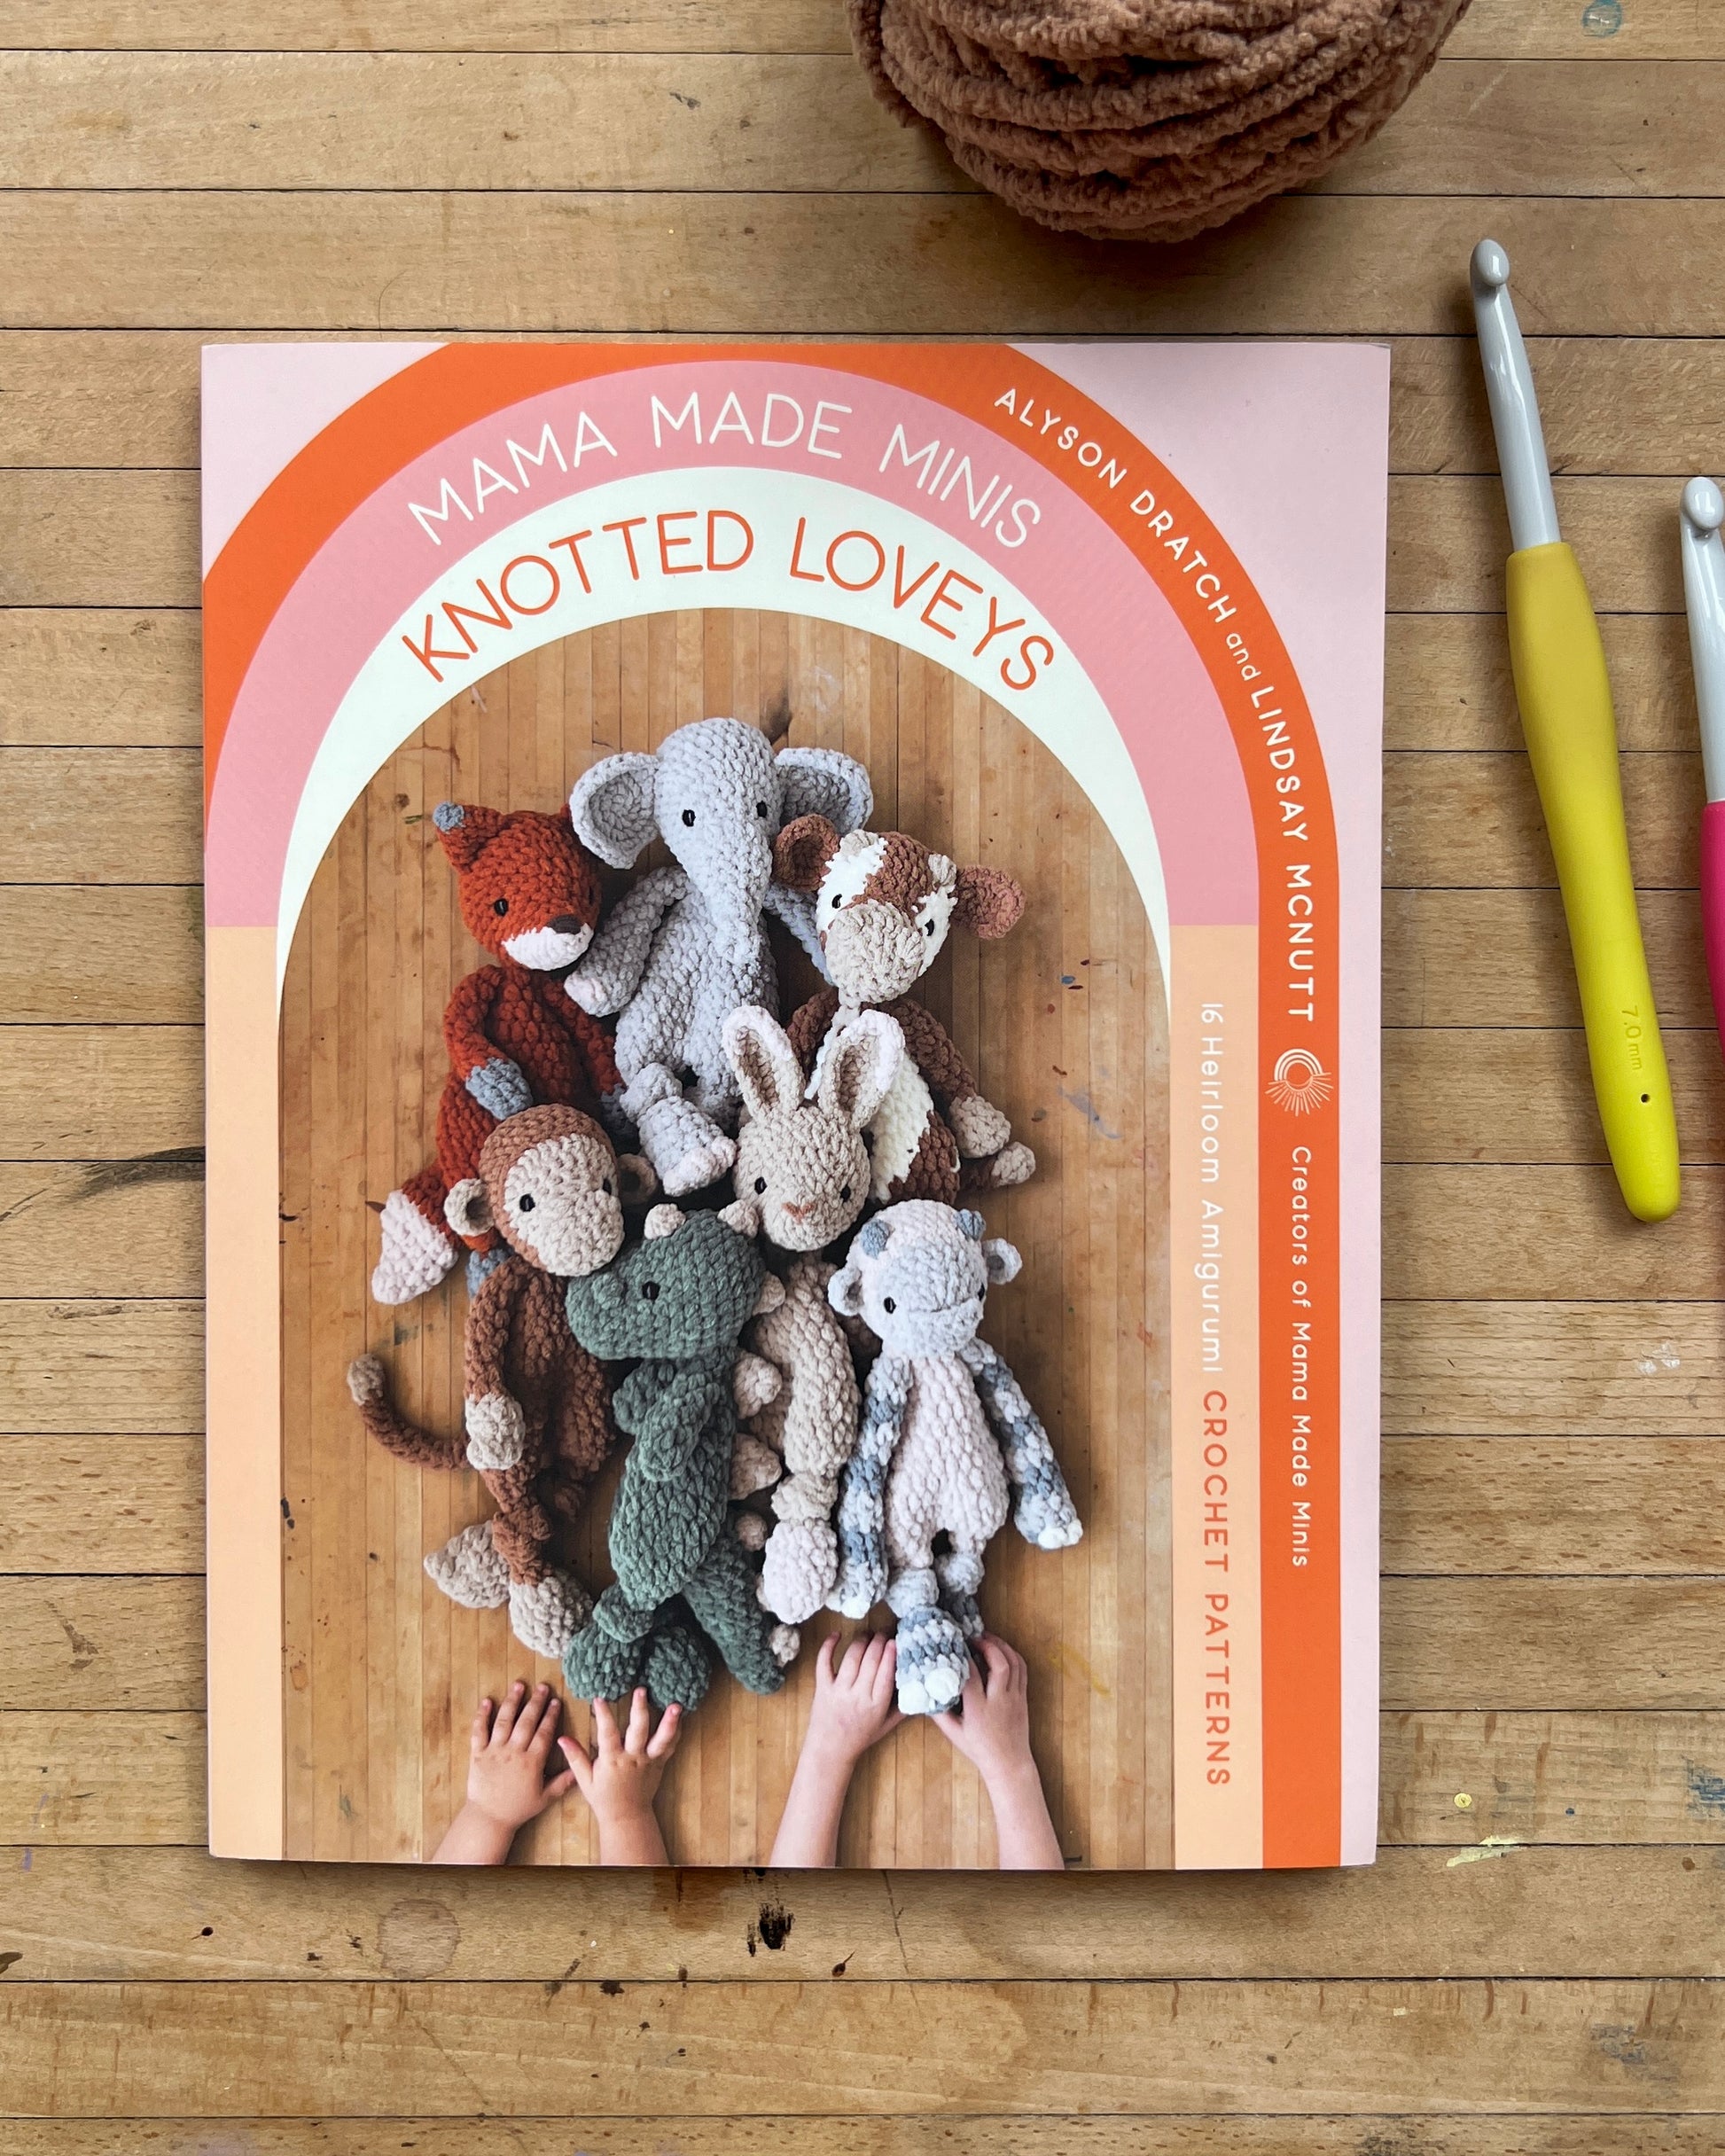 What to make 1st!? Meet Max the Monkey from Mama Made Minis Knotted Loveys  Book!! 💛🧡💛🧡 